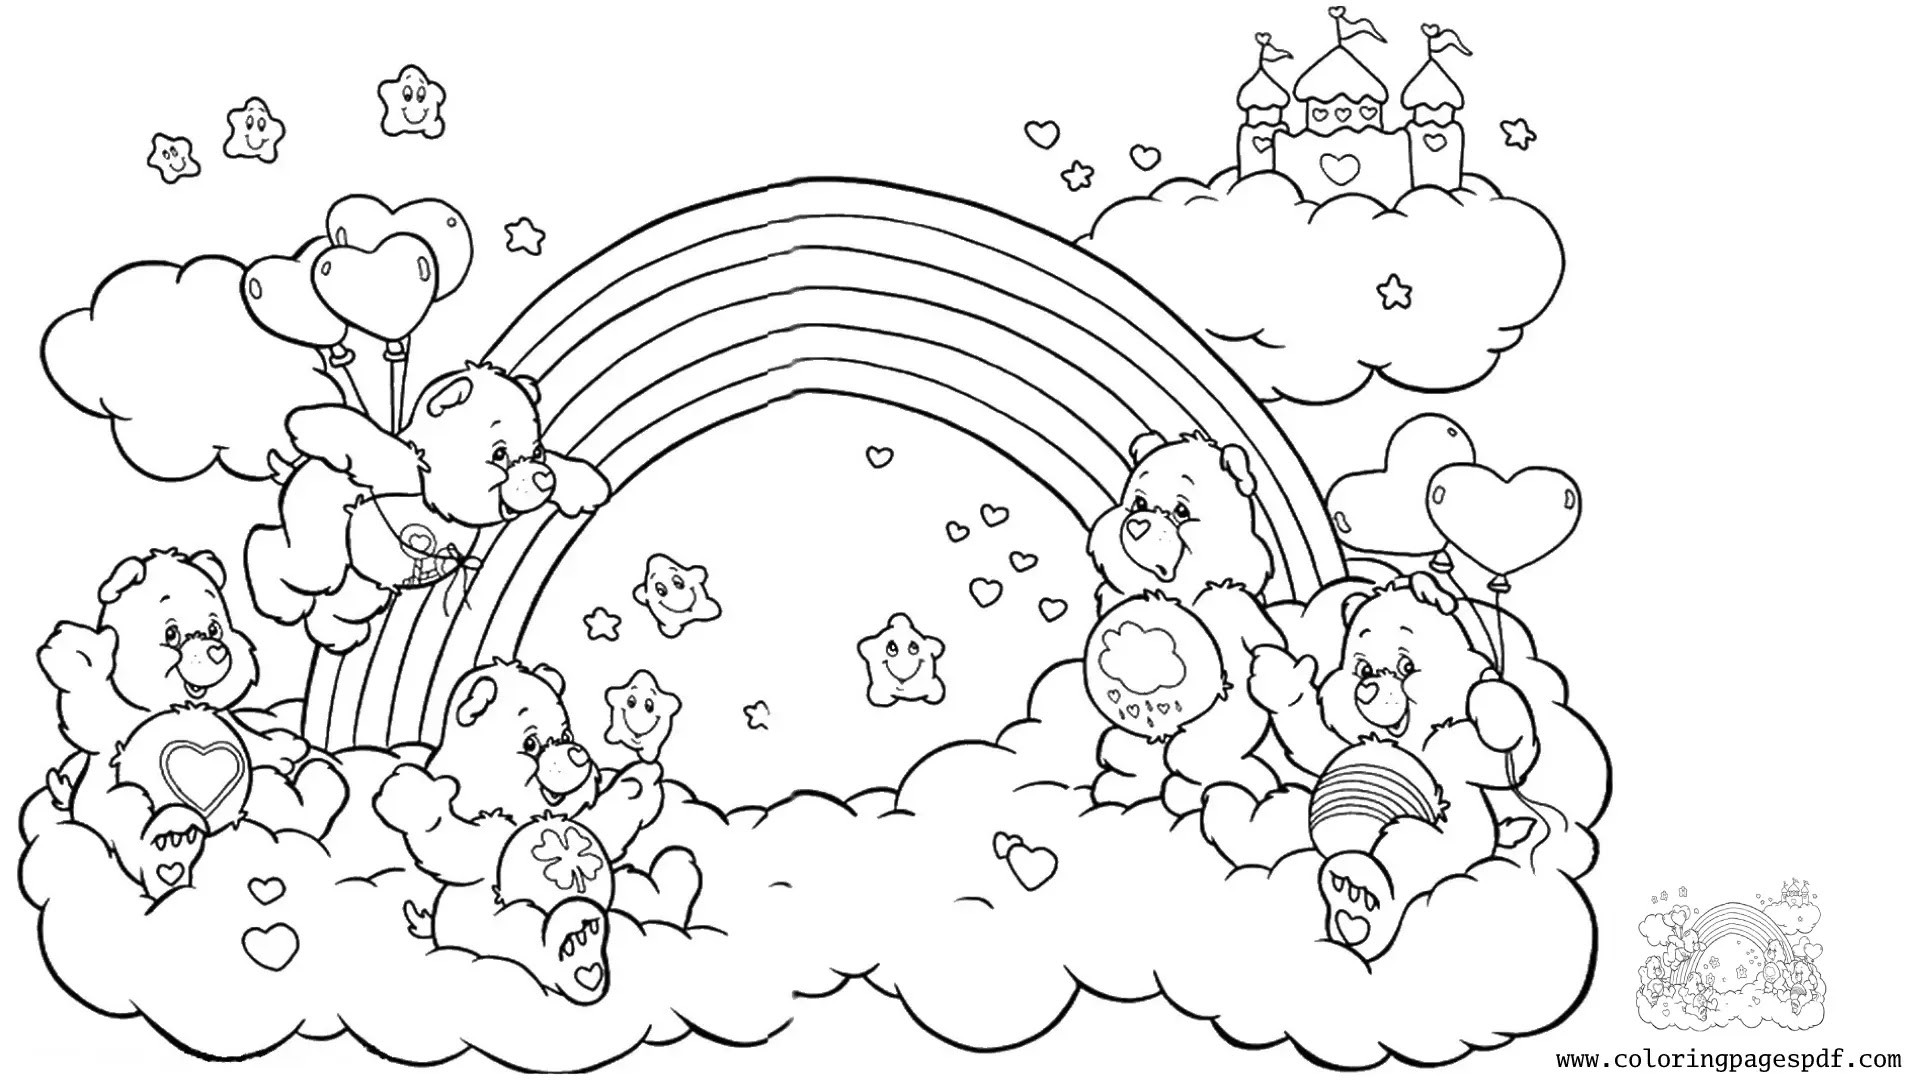 20 Rainbow Coloring Page For Your Kids